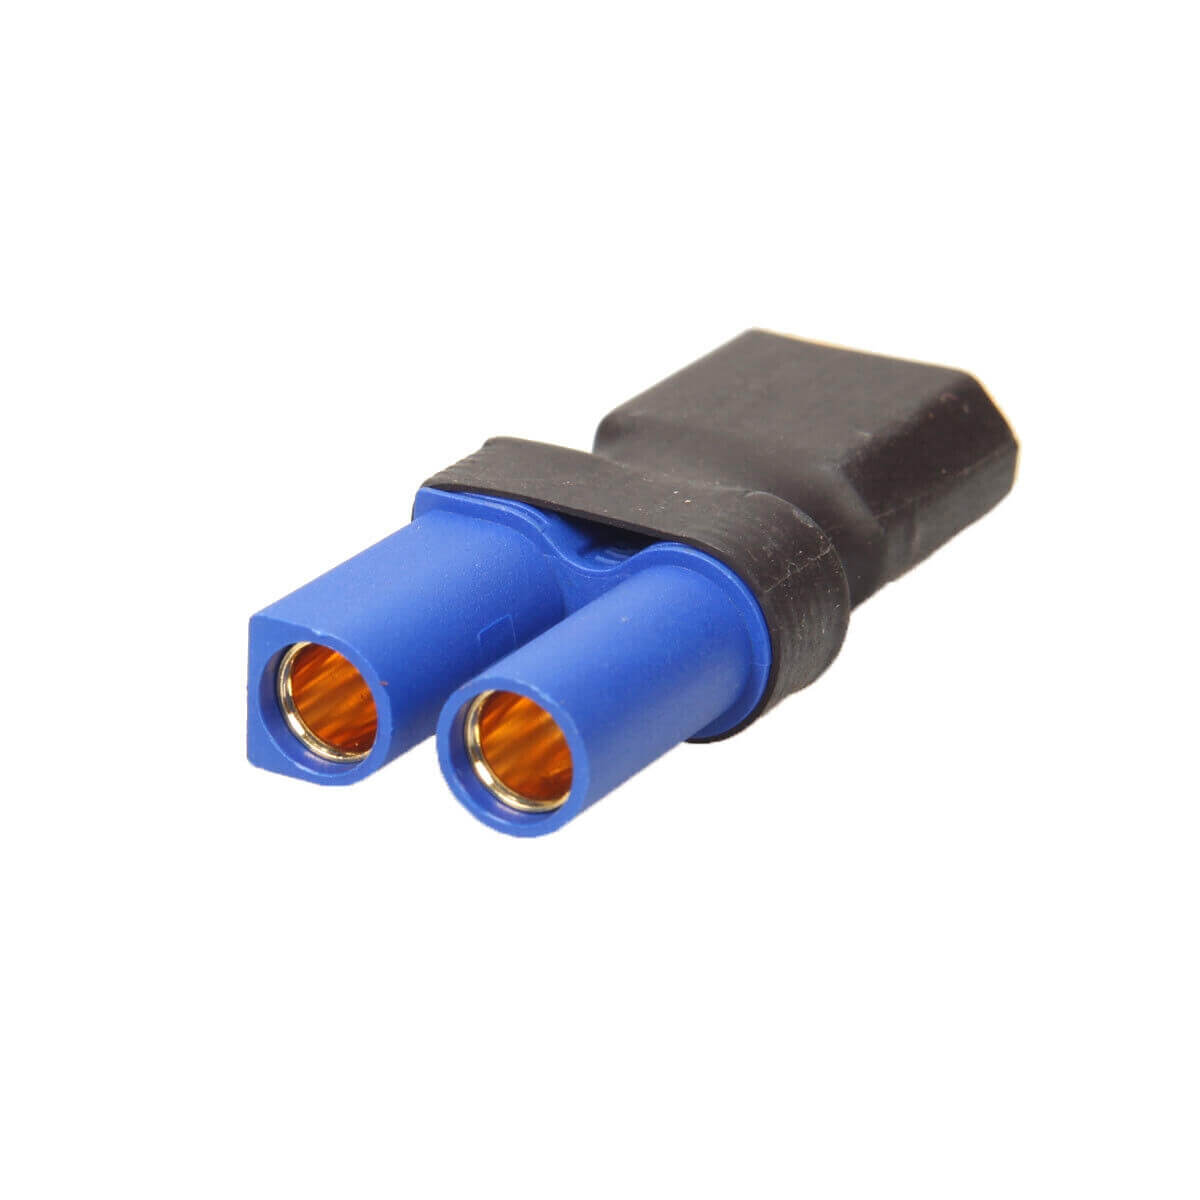 EC5 Female Connector to XT60 Male Plug Adapter